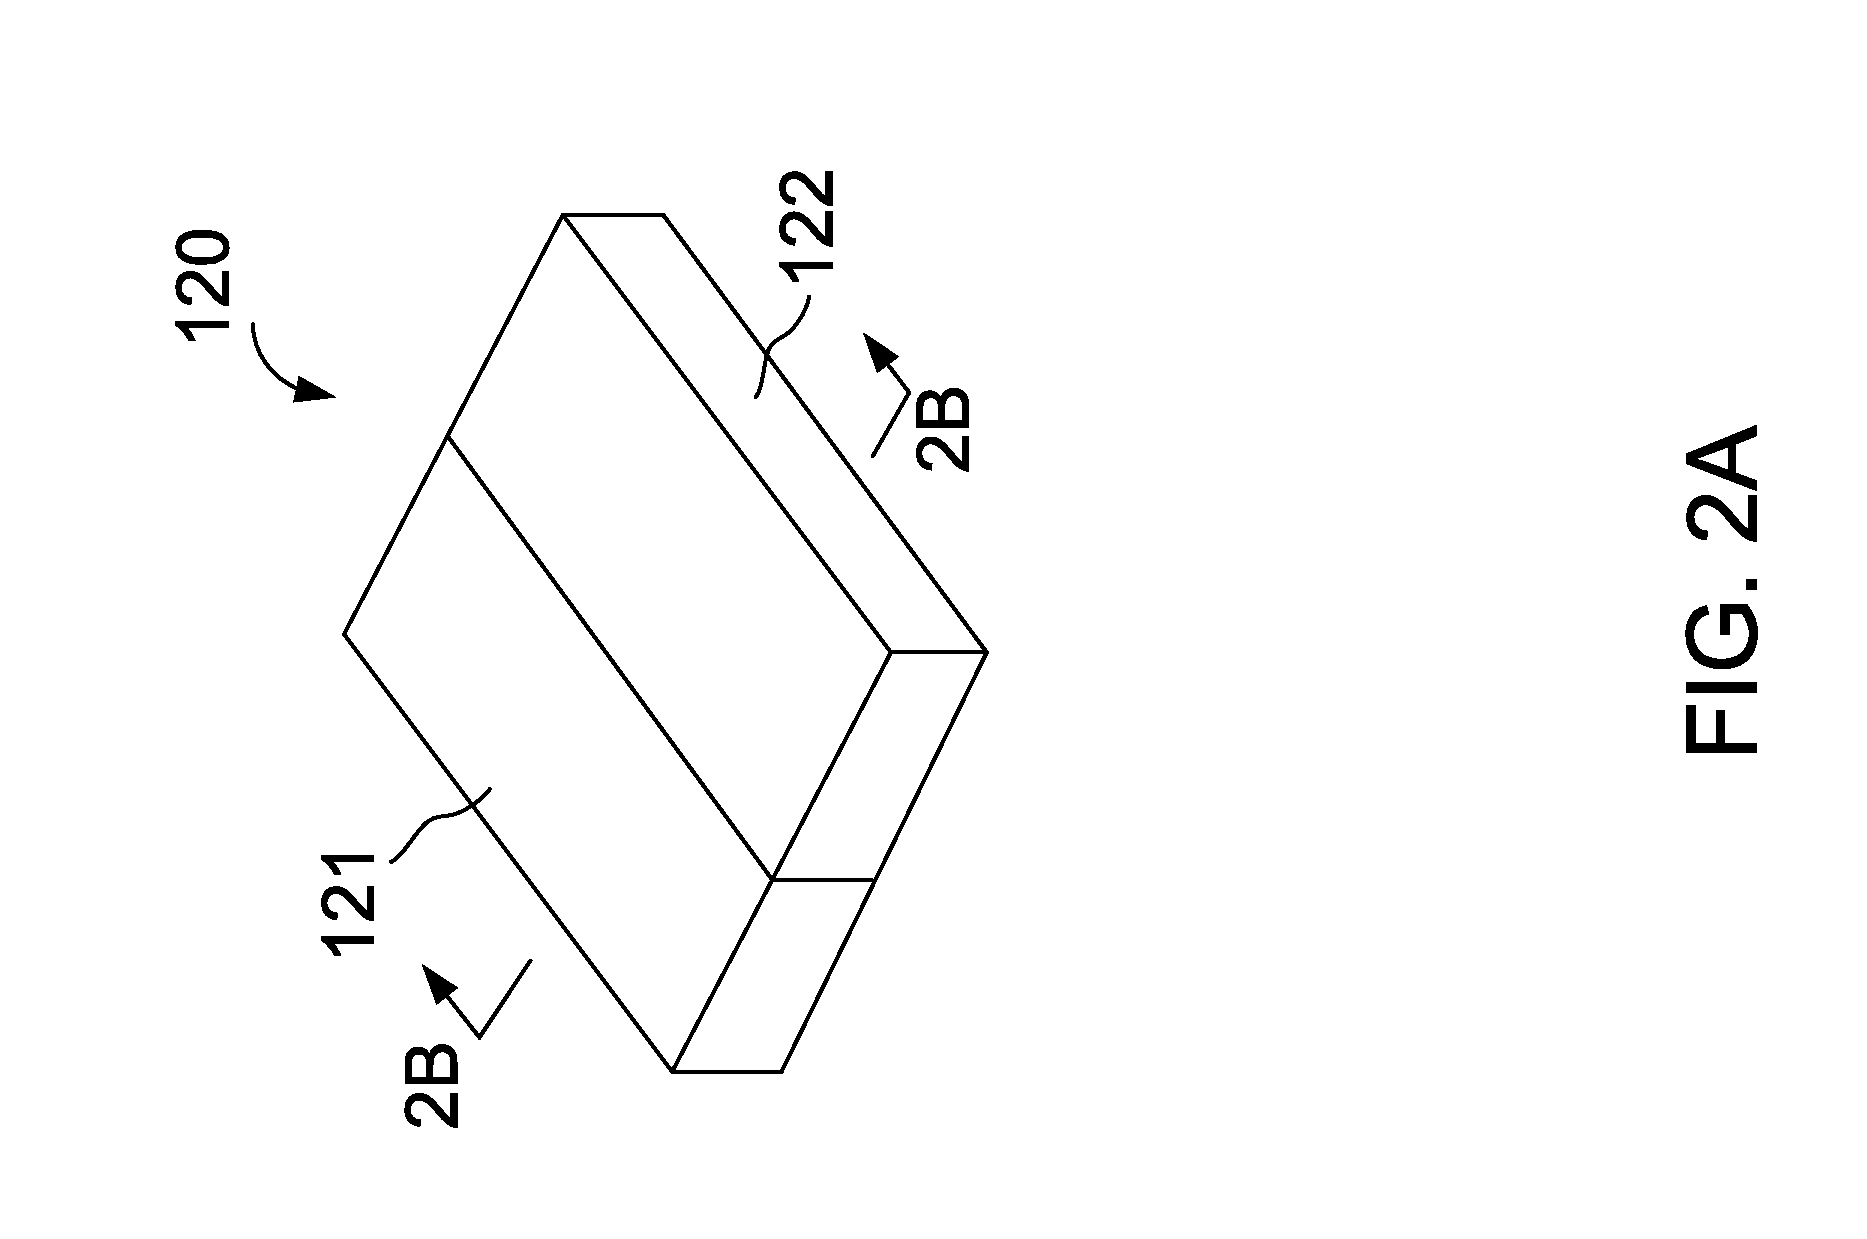 Flux focusing arrangement for permanent magnets, methods of fabricating such arrangements, and machines including such arrangements